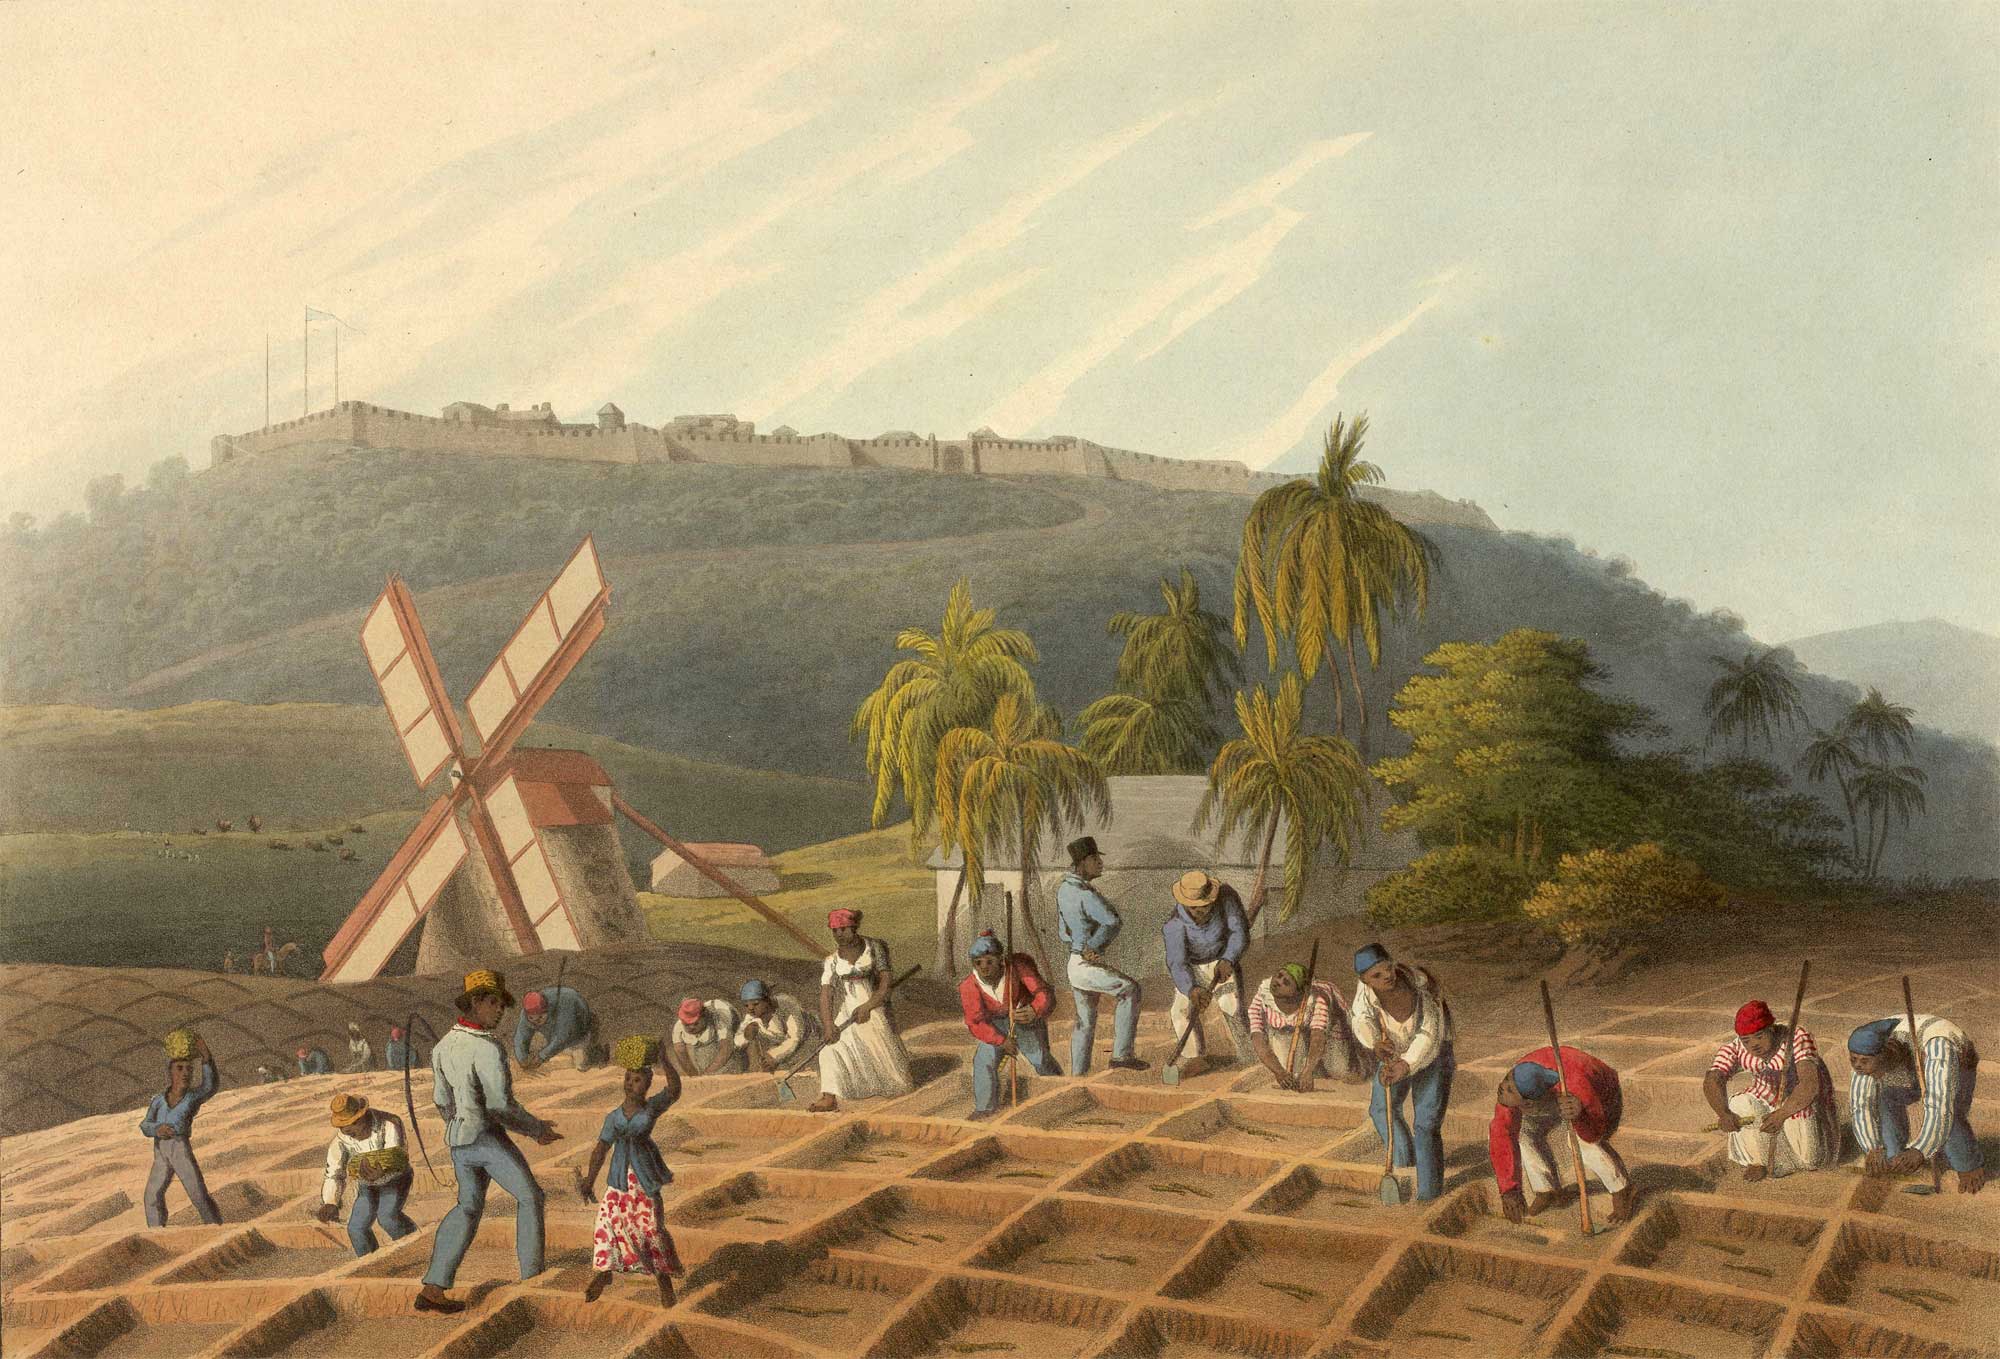 A color illustration showing enslaved people planting sugarcane on Antigua in the early 1800s. The image shows enslaved Black men, women, and perhaps children digging rows of square pits with hoes and placing segments of sugarcane in the pits. At least two Black men stand over the other workers hold whips. A windmill and palm trees can be seen in the background. A hill with a fortress on top can be seen in the far background.